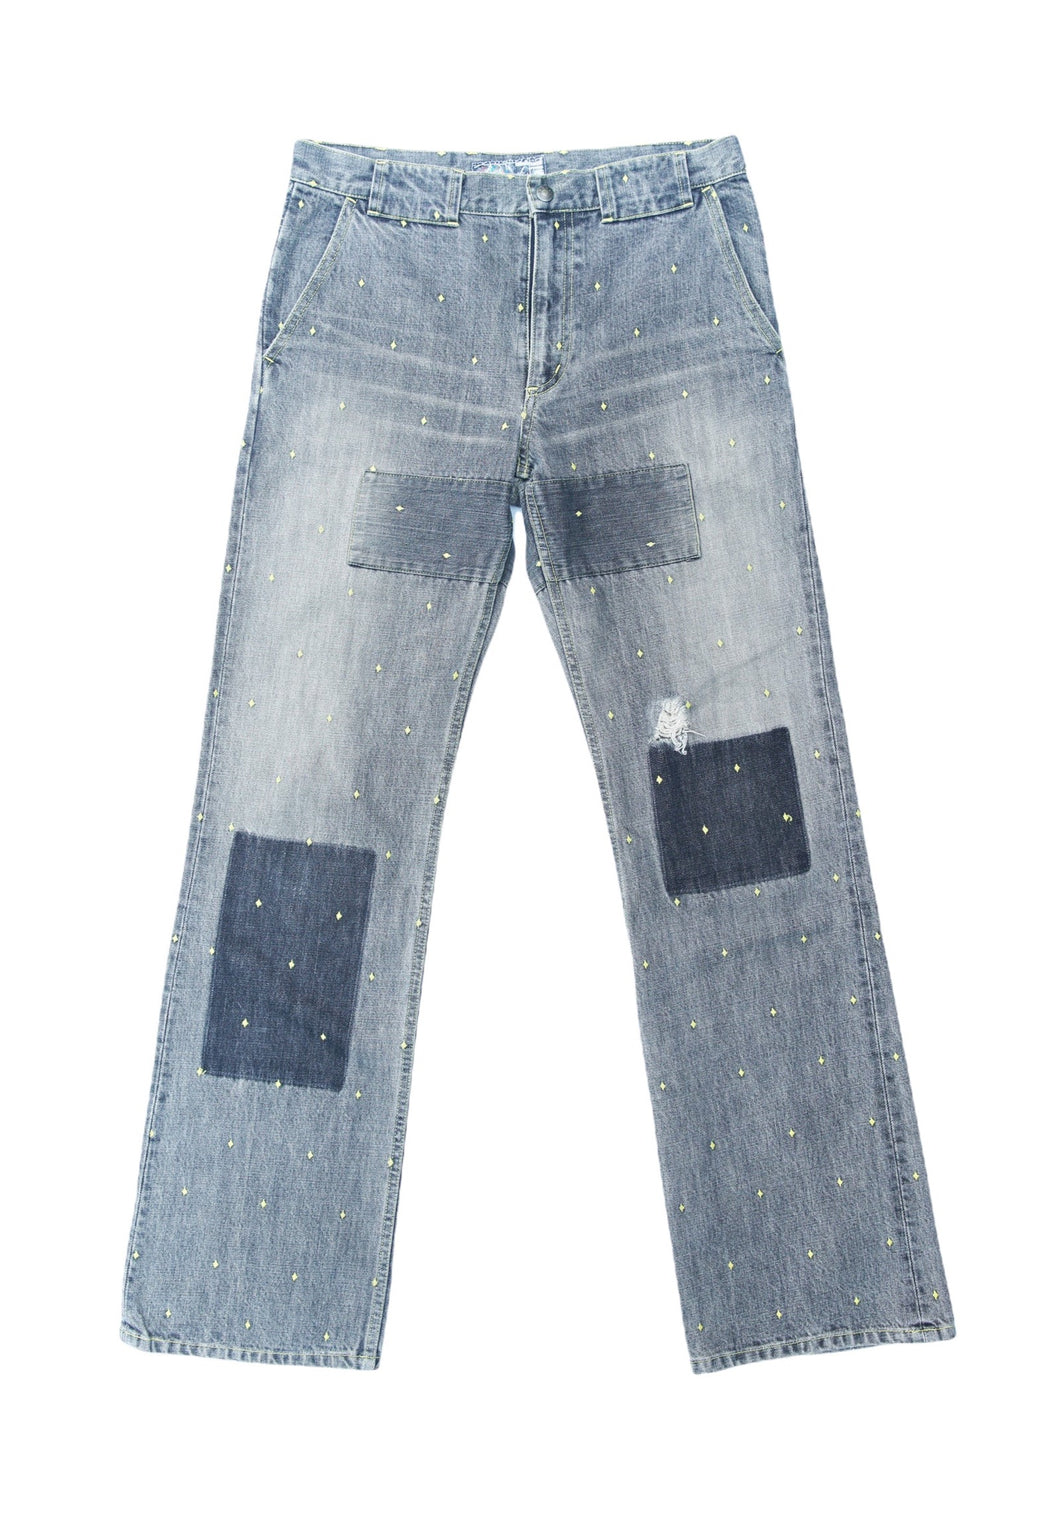 Undercover All Over Embroidered Denim